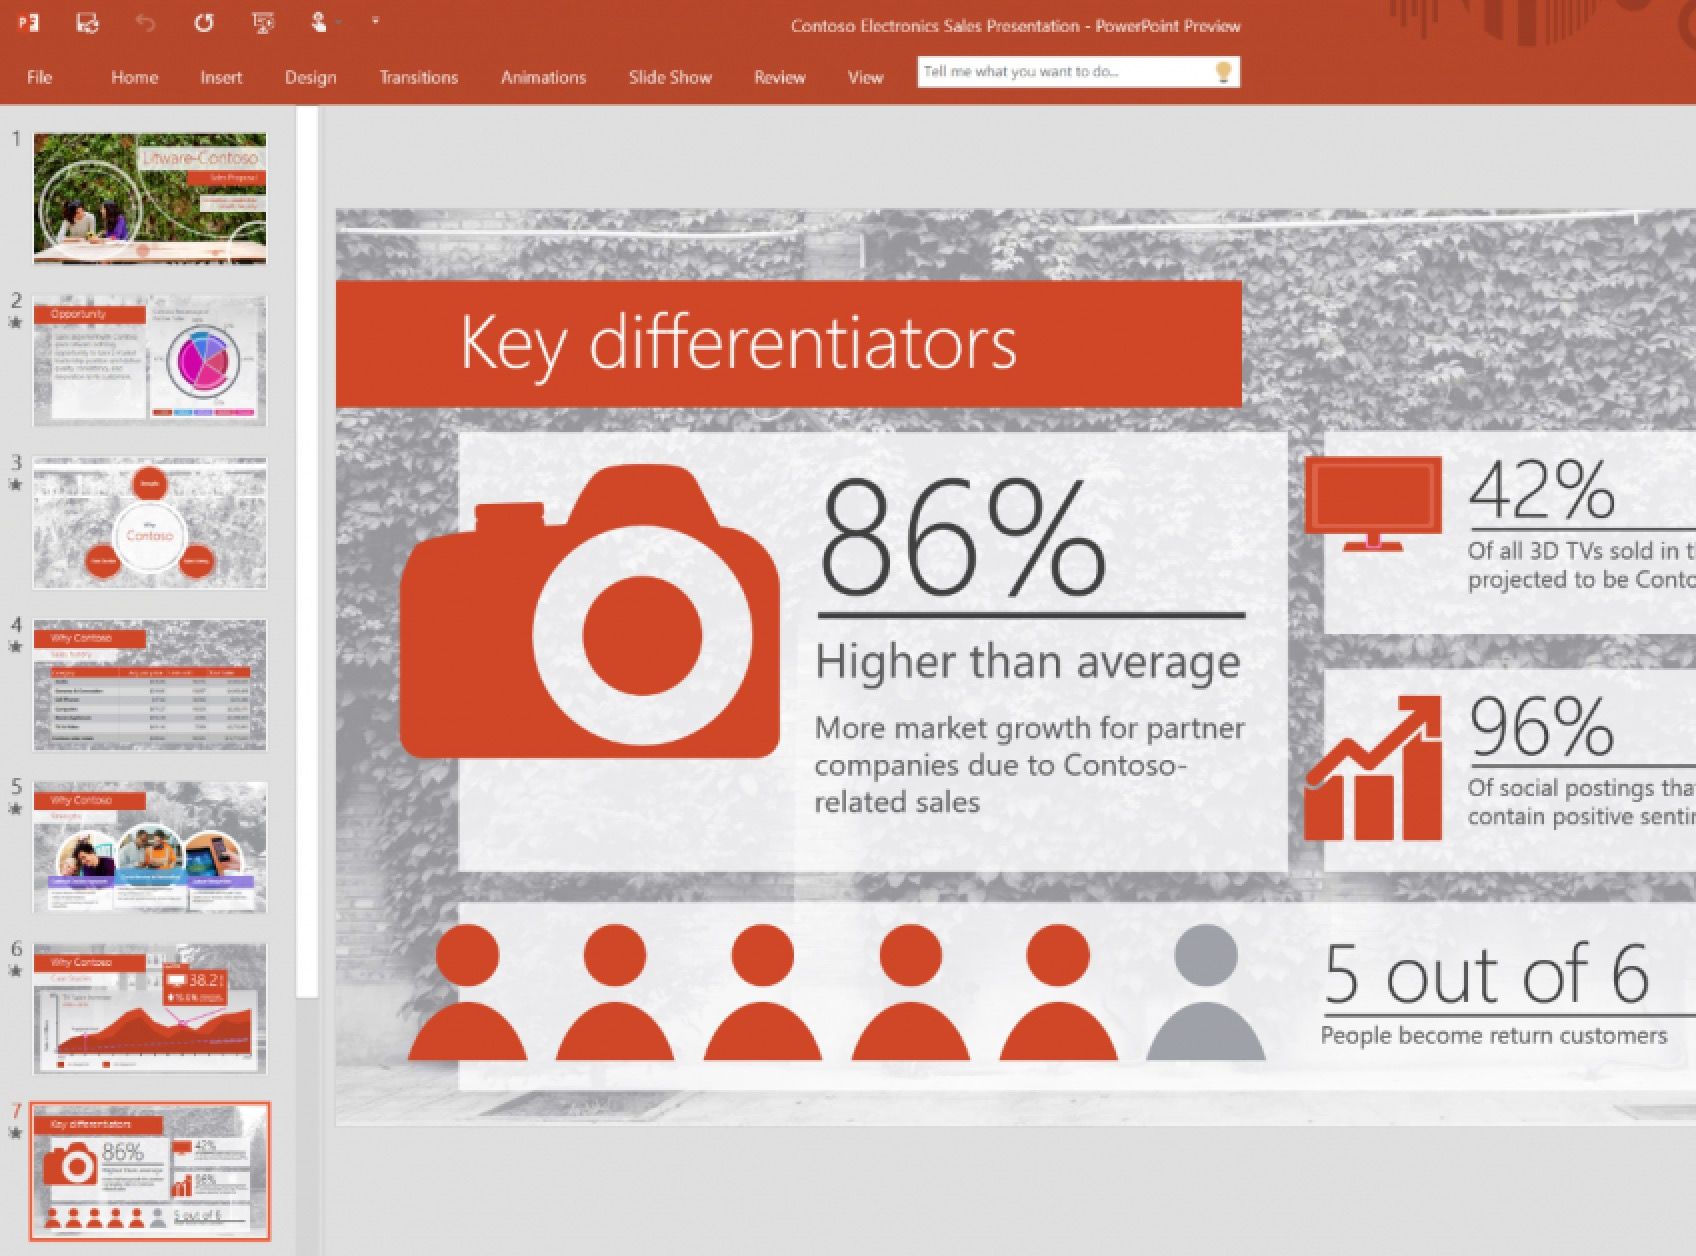 microsoft launches public preview of office 2016 desktop apps for windows image 1